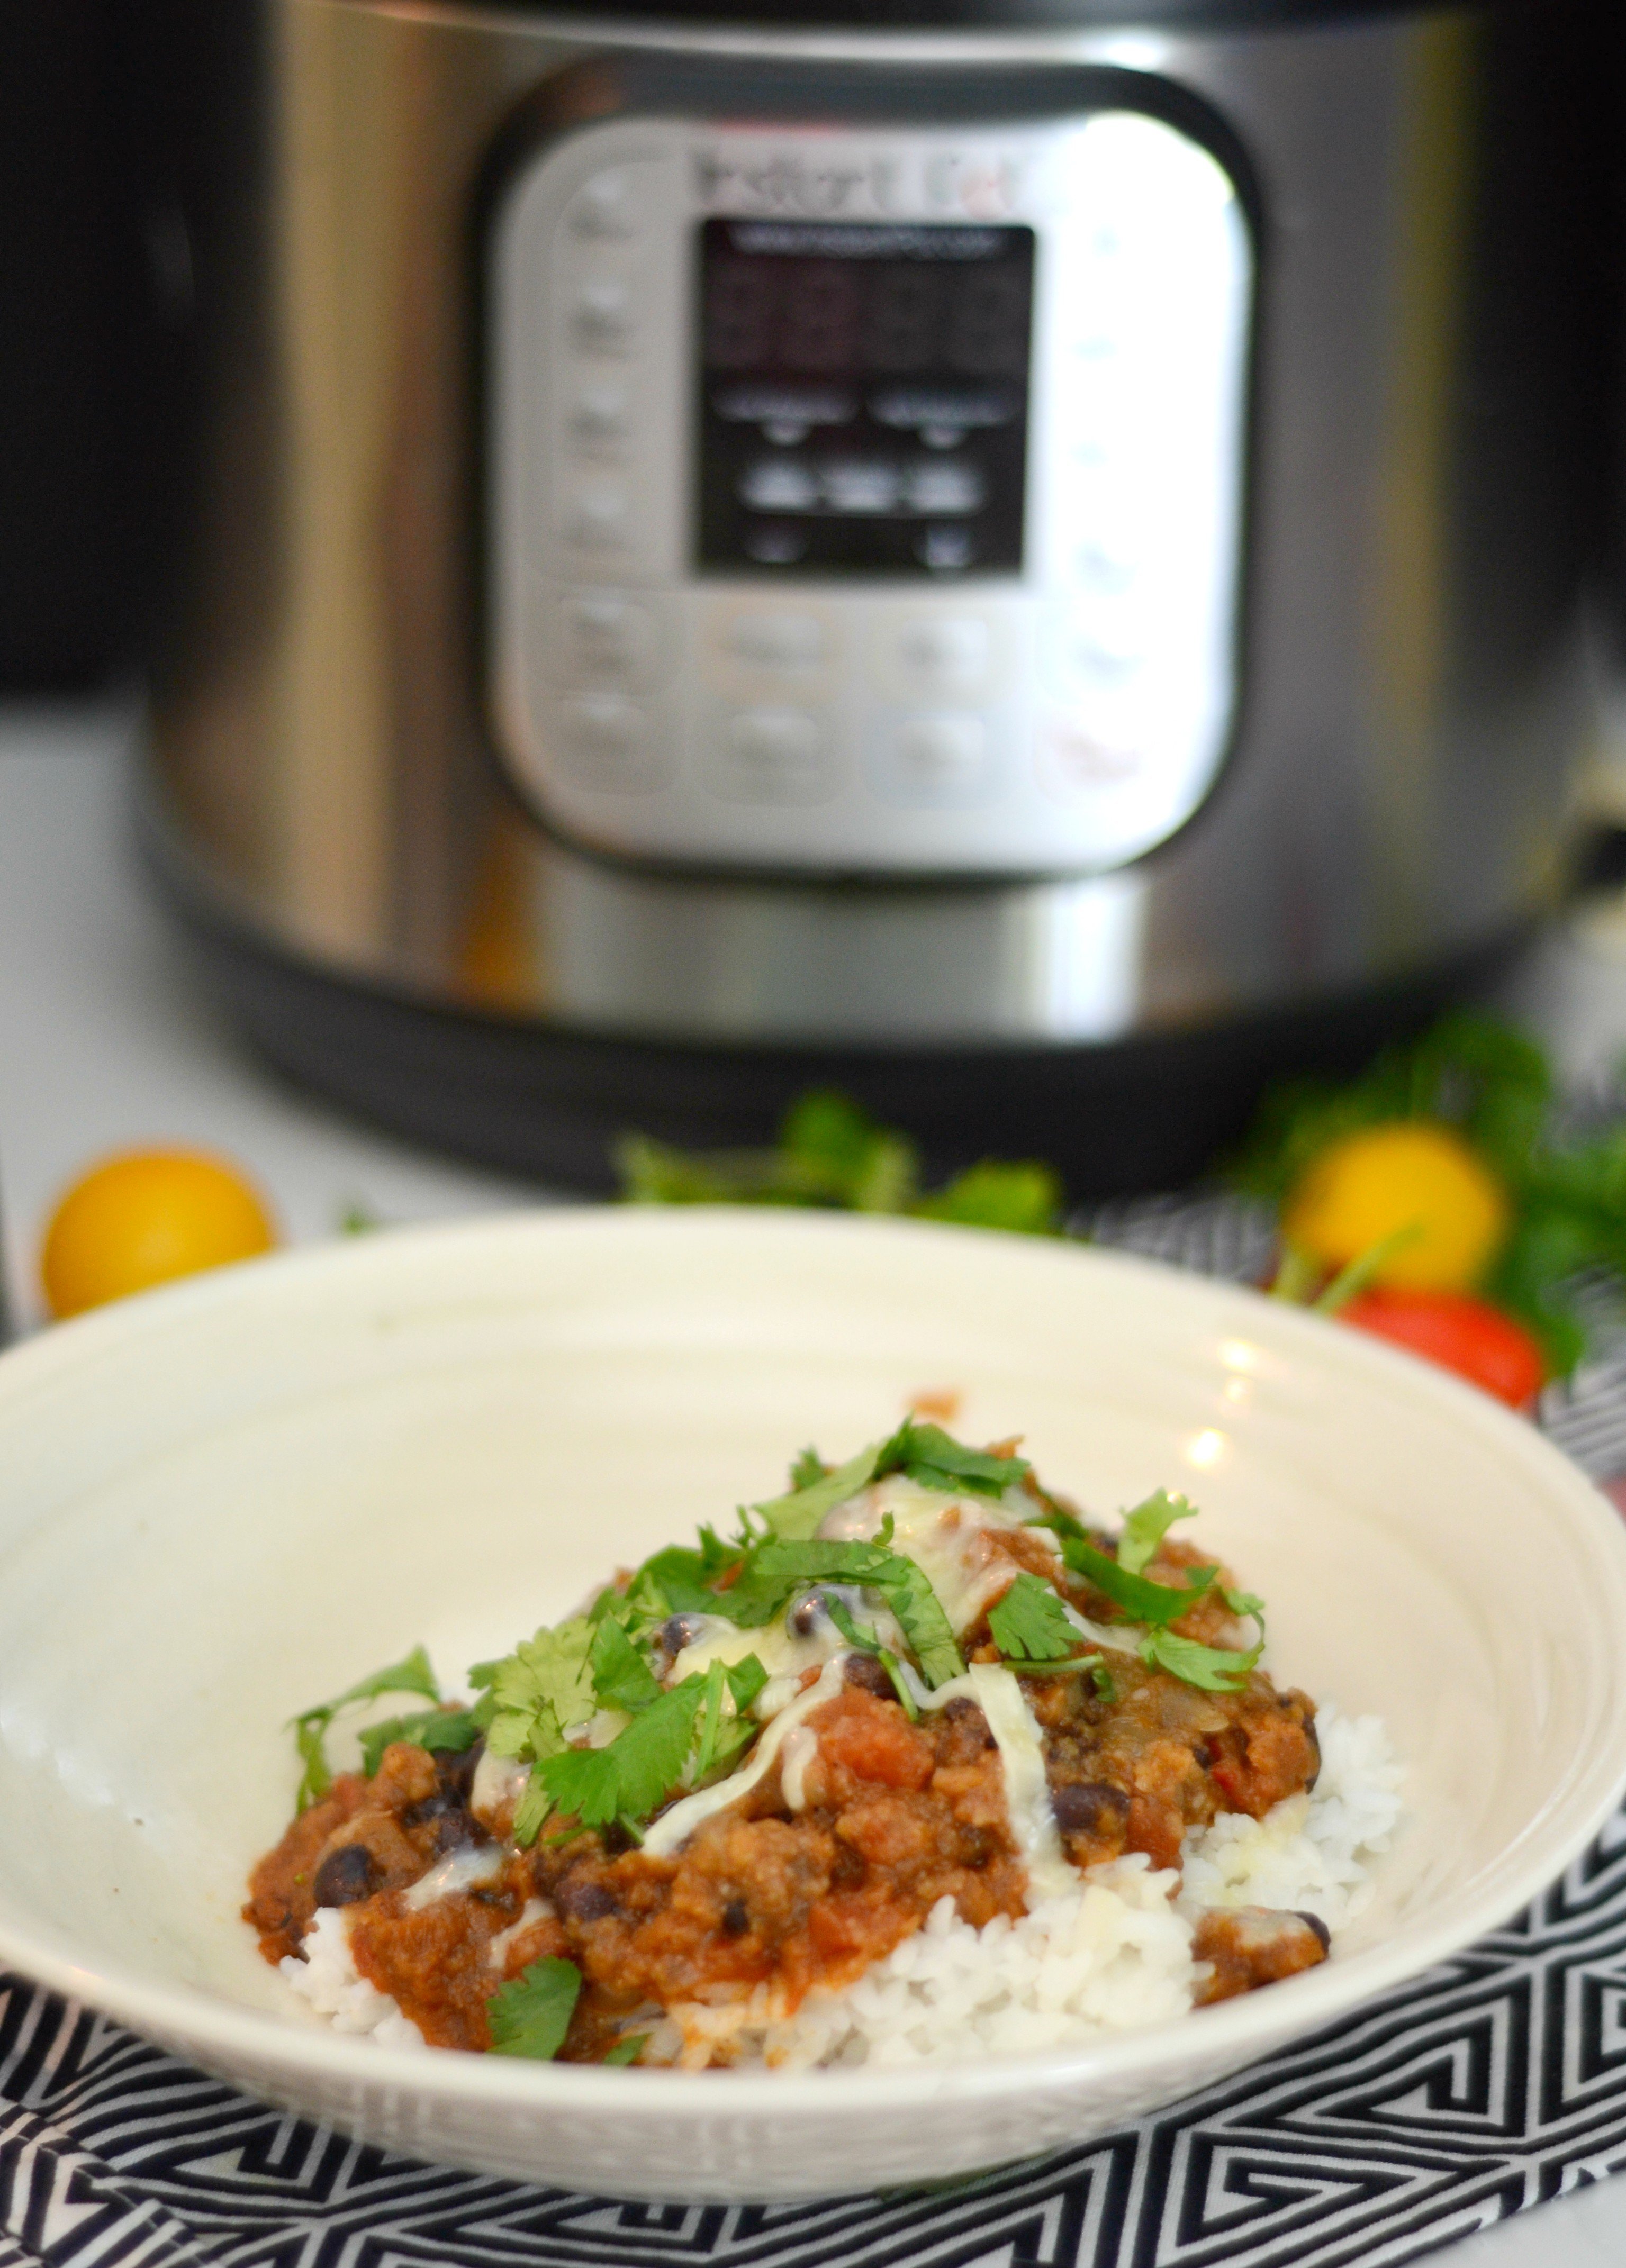 Bowl of Vegetarian Chili with Instant Pot in background